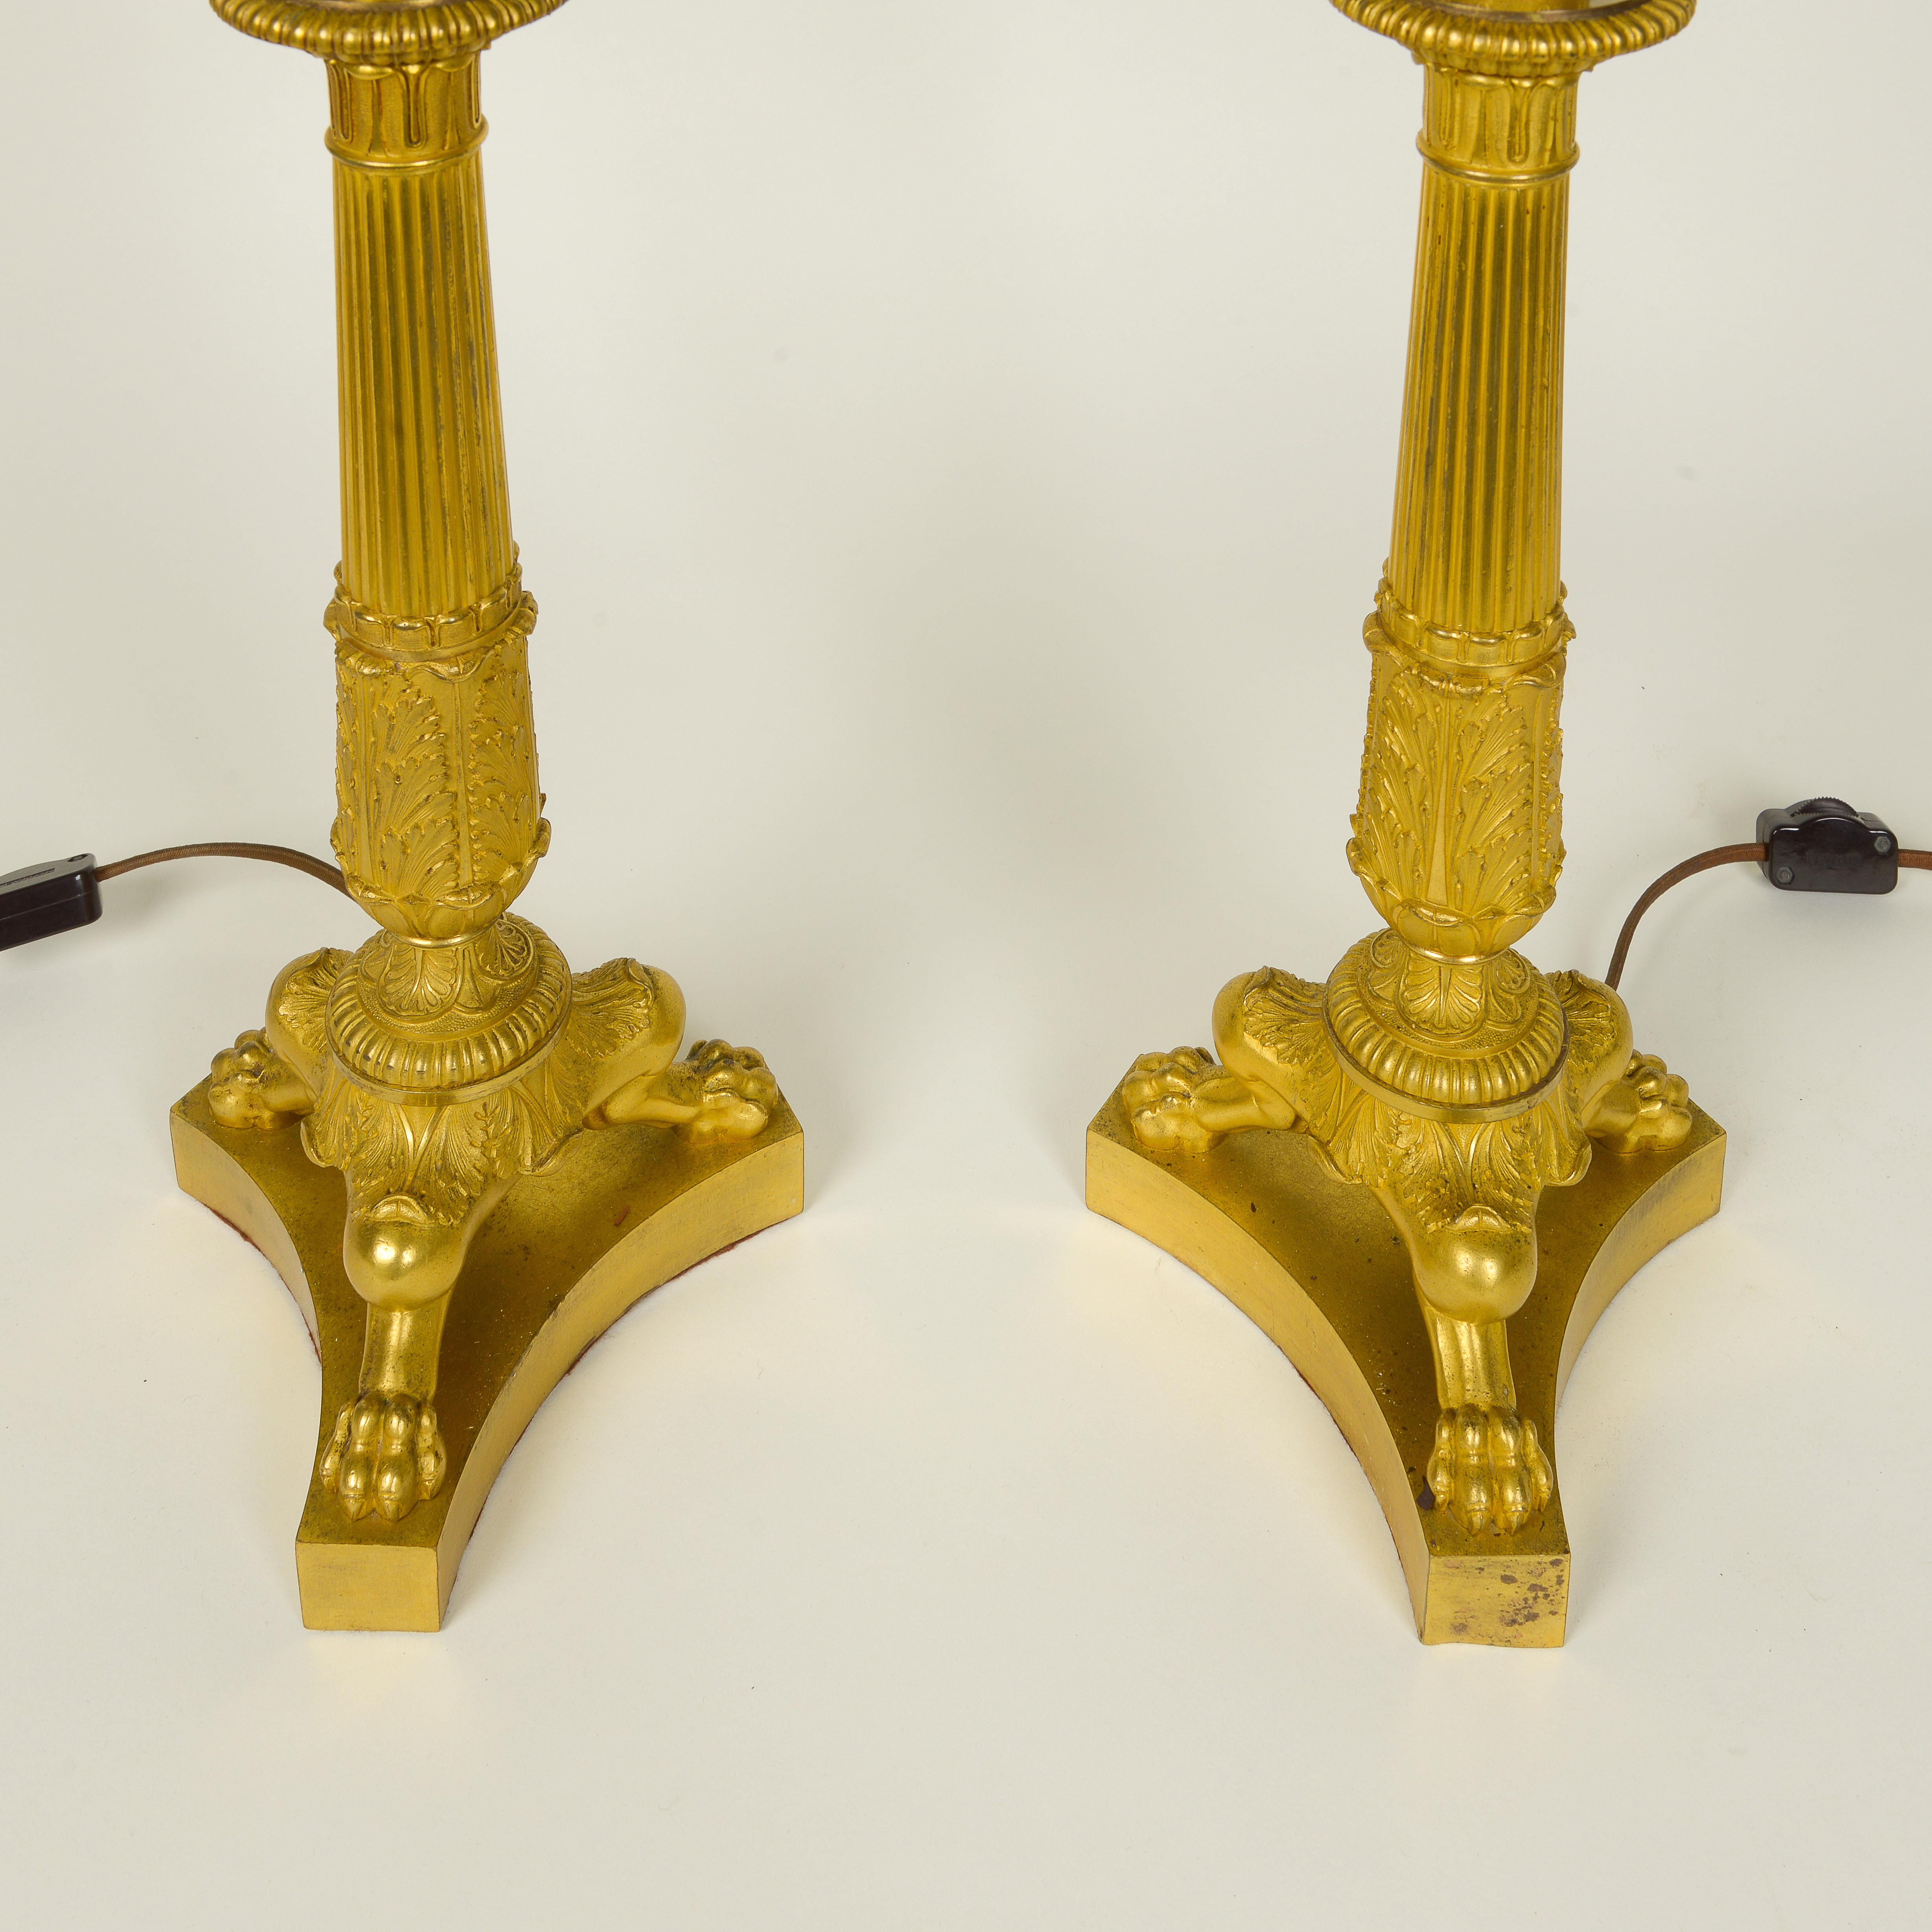 Fine Pair of French Charles X Gilt Bronze Candelabra Mounted as Lamps For Sale 4